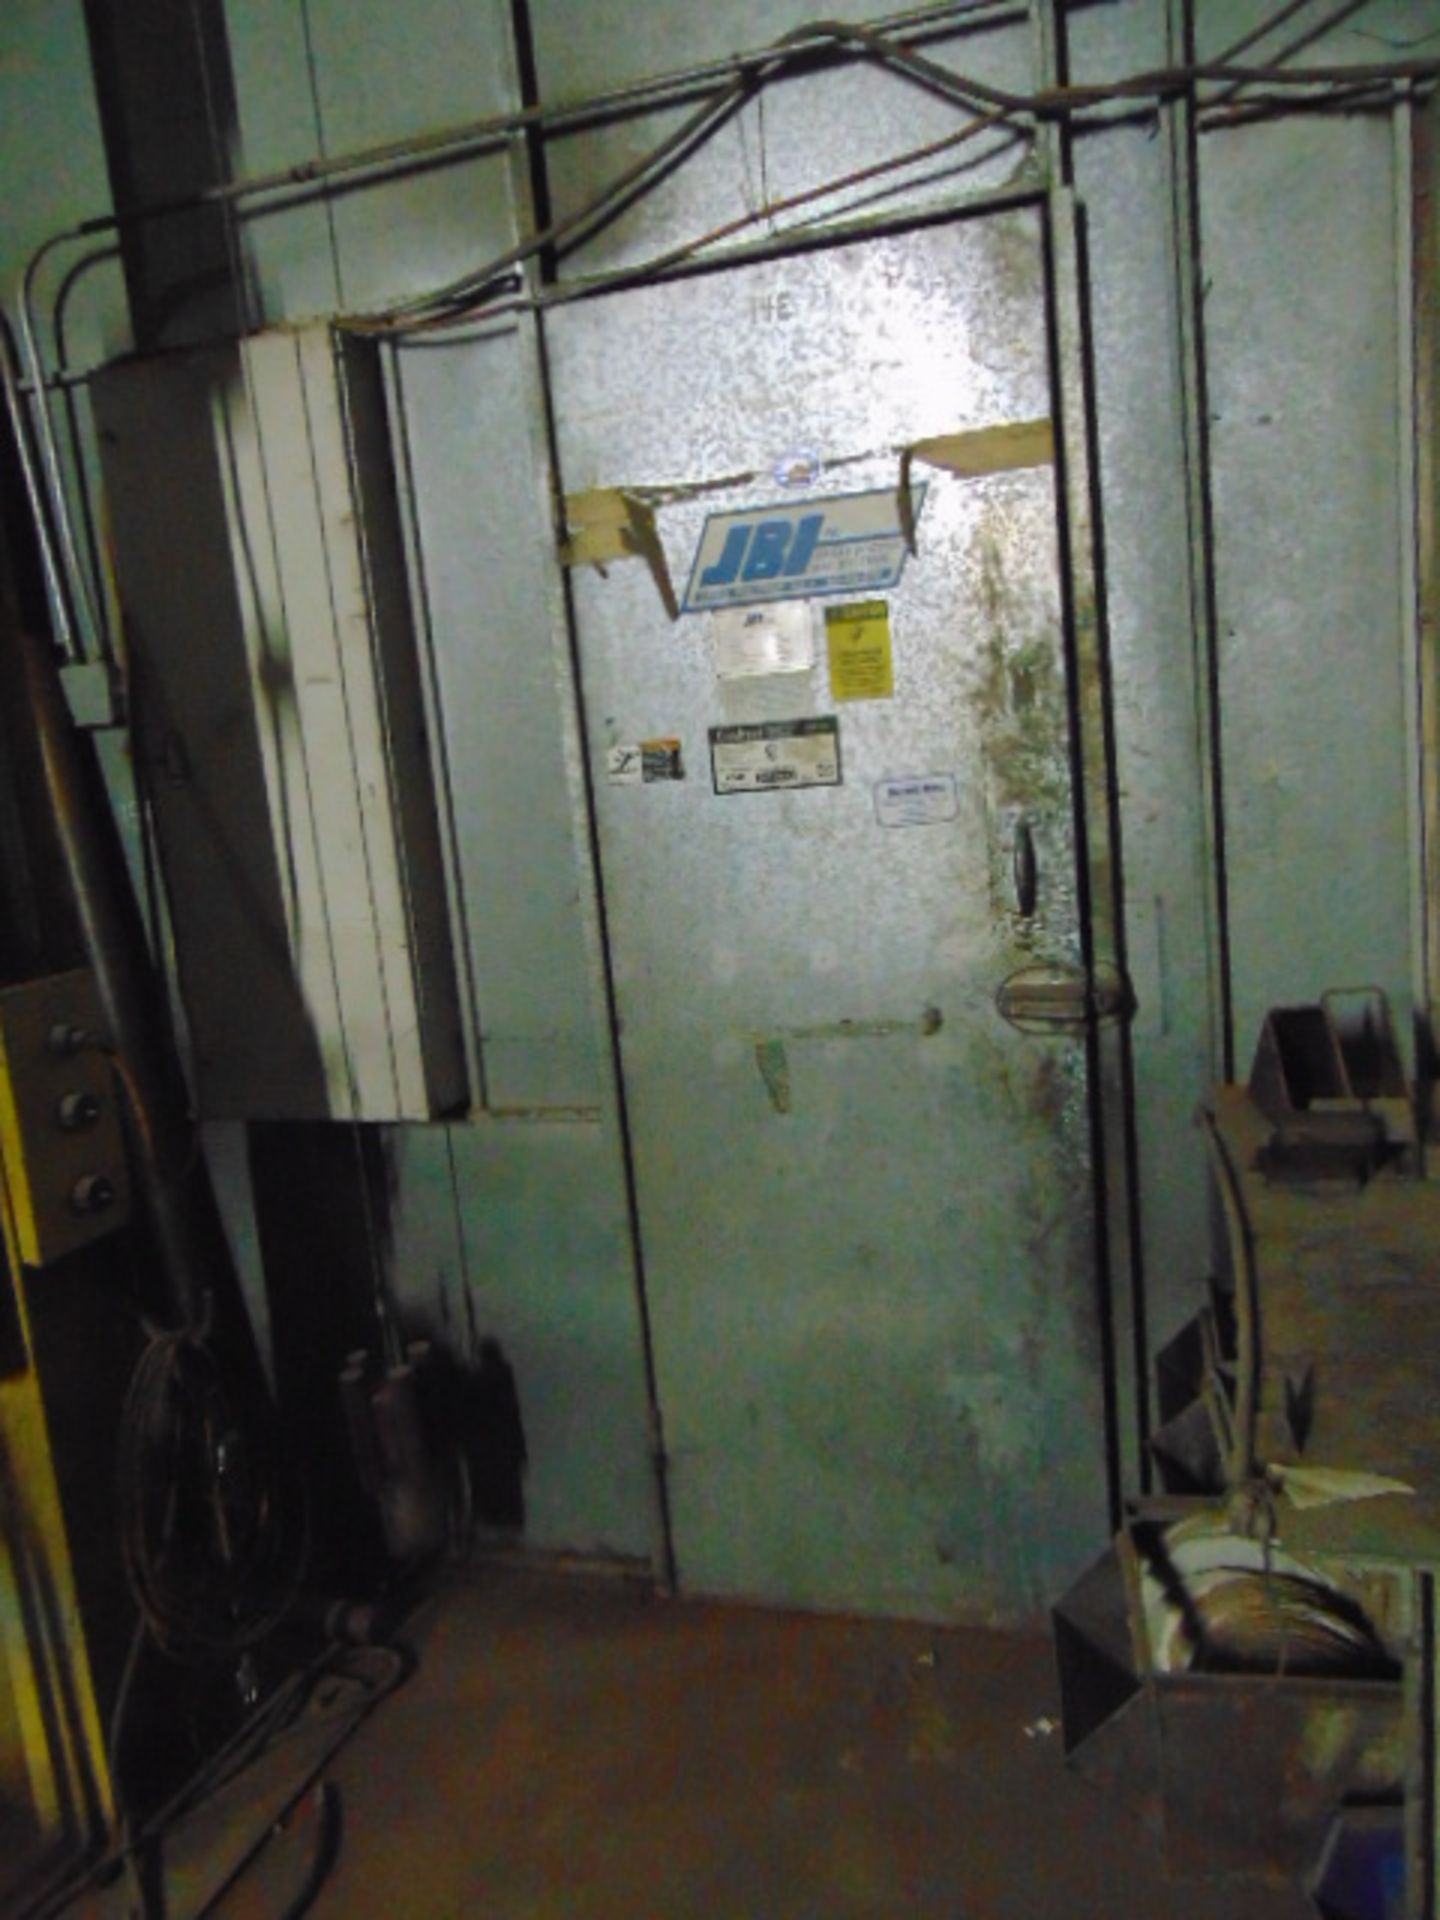 COMBINED CYCLE SPRAY BOOTH, JBI TRUCK BOOTH MDL. T-65-PDT-S, new 1995, galvanized bolted panel - Image 10 of 11